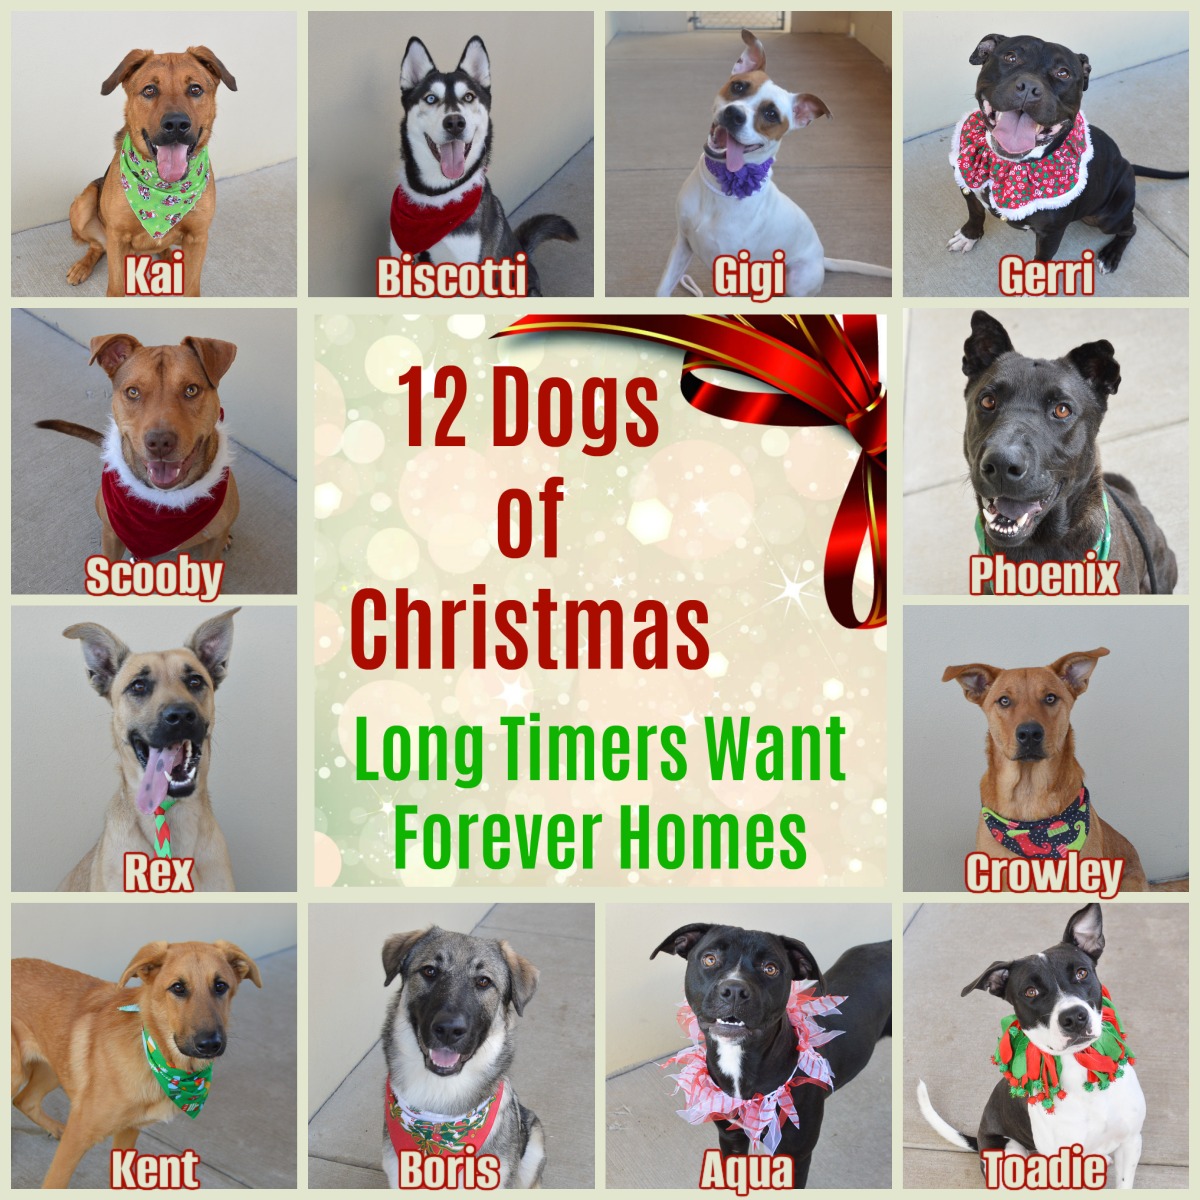 This holiday season, #CollinCountyAnimalsServices is shining a spotlight on their PAWsome long-timers with the 12 Dogs of Christmas. Each of these incredible pups dreams of finding a loving forever home by Christmas. Will you make their wish come true? #helpccas #collincountytx